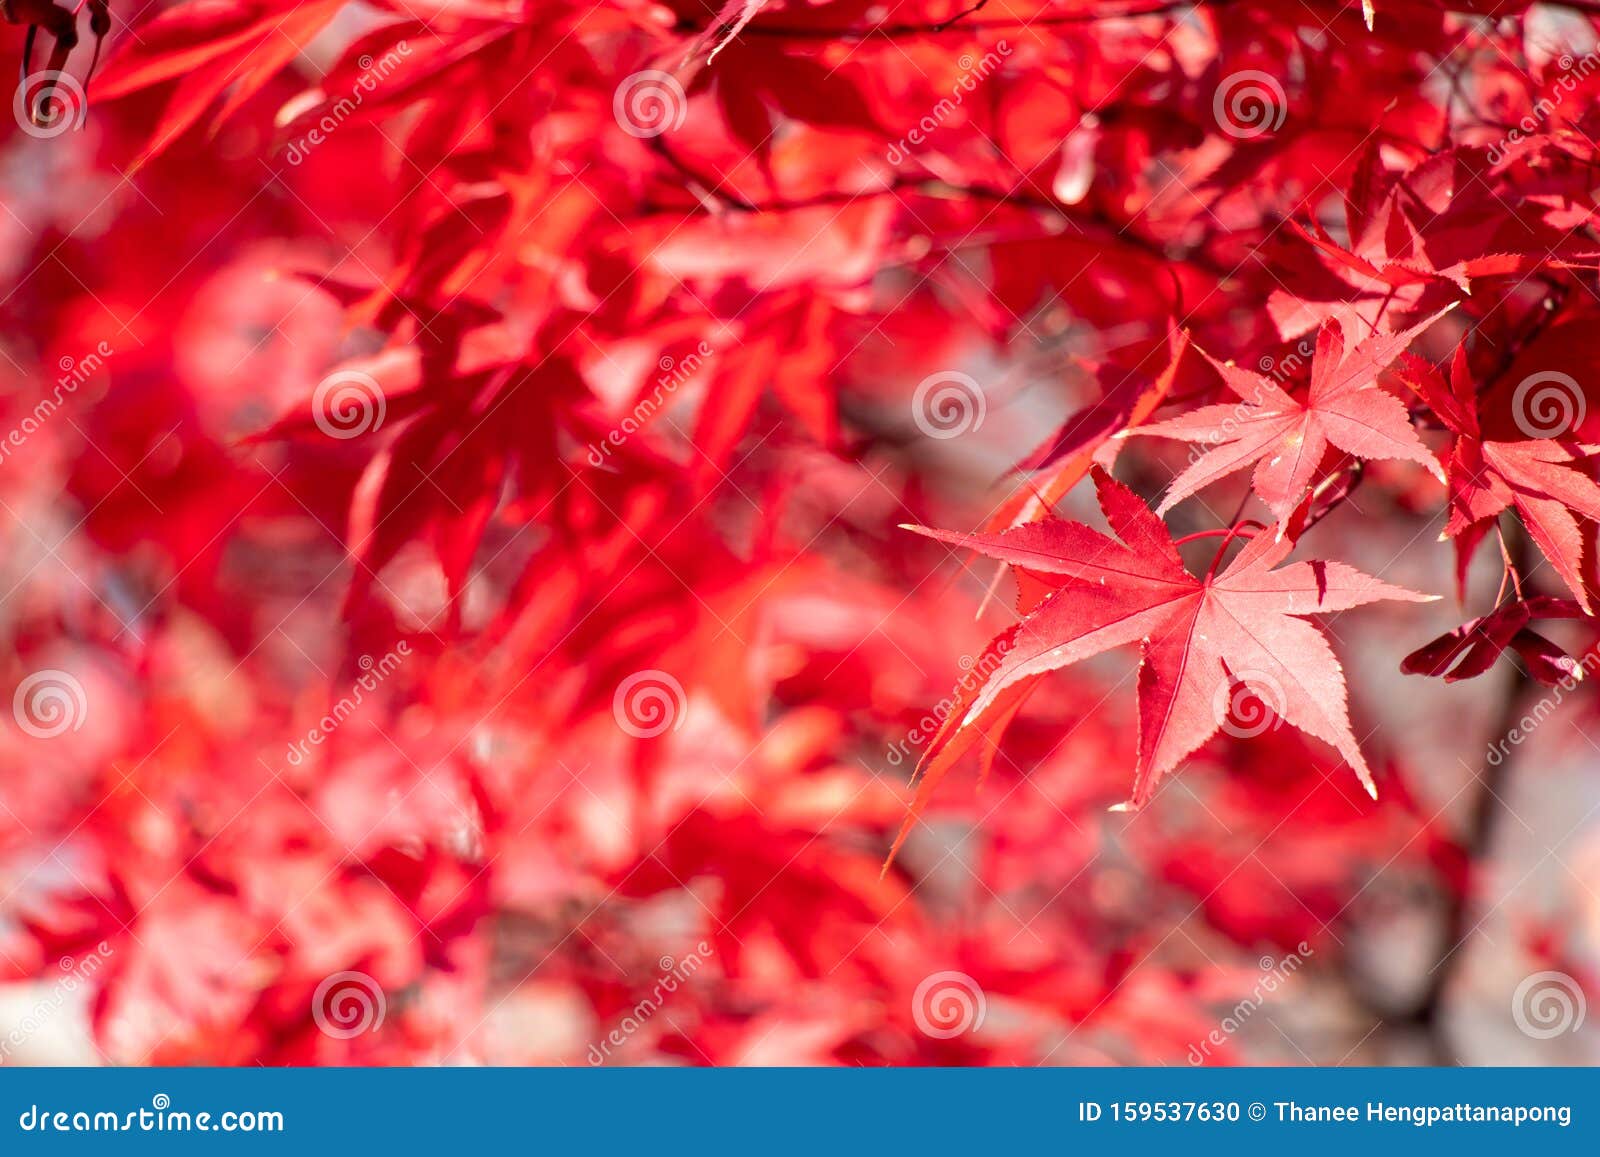 Red Color of Maple Tree Leaf Focus at Front Leaf with Blurred Background  Stock Photo - Image of blue, foliage: 159537630